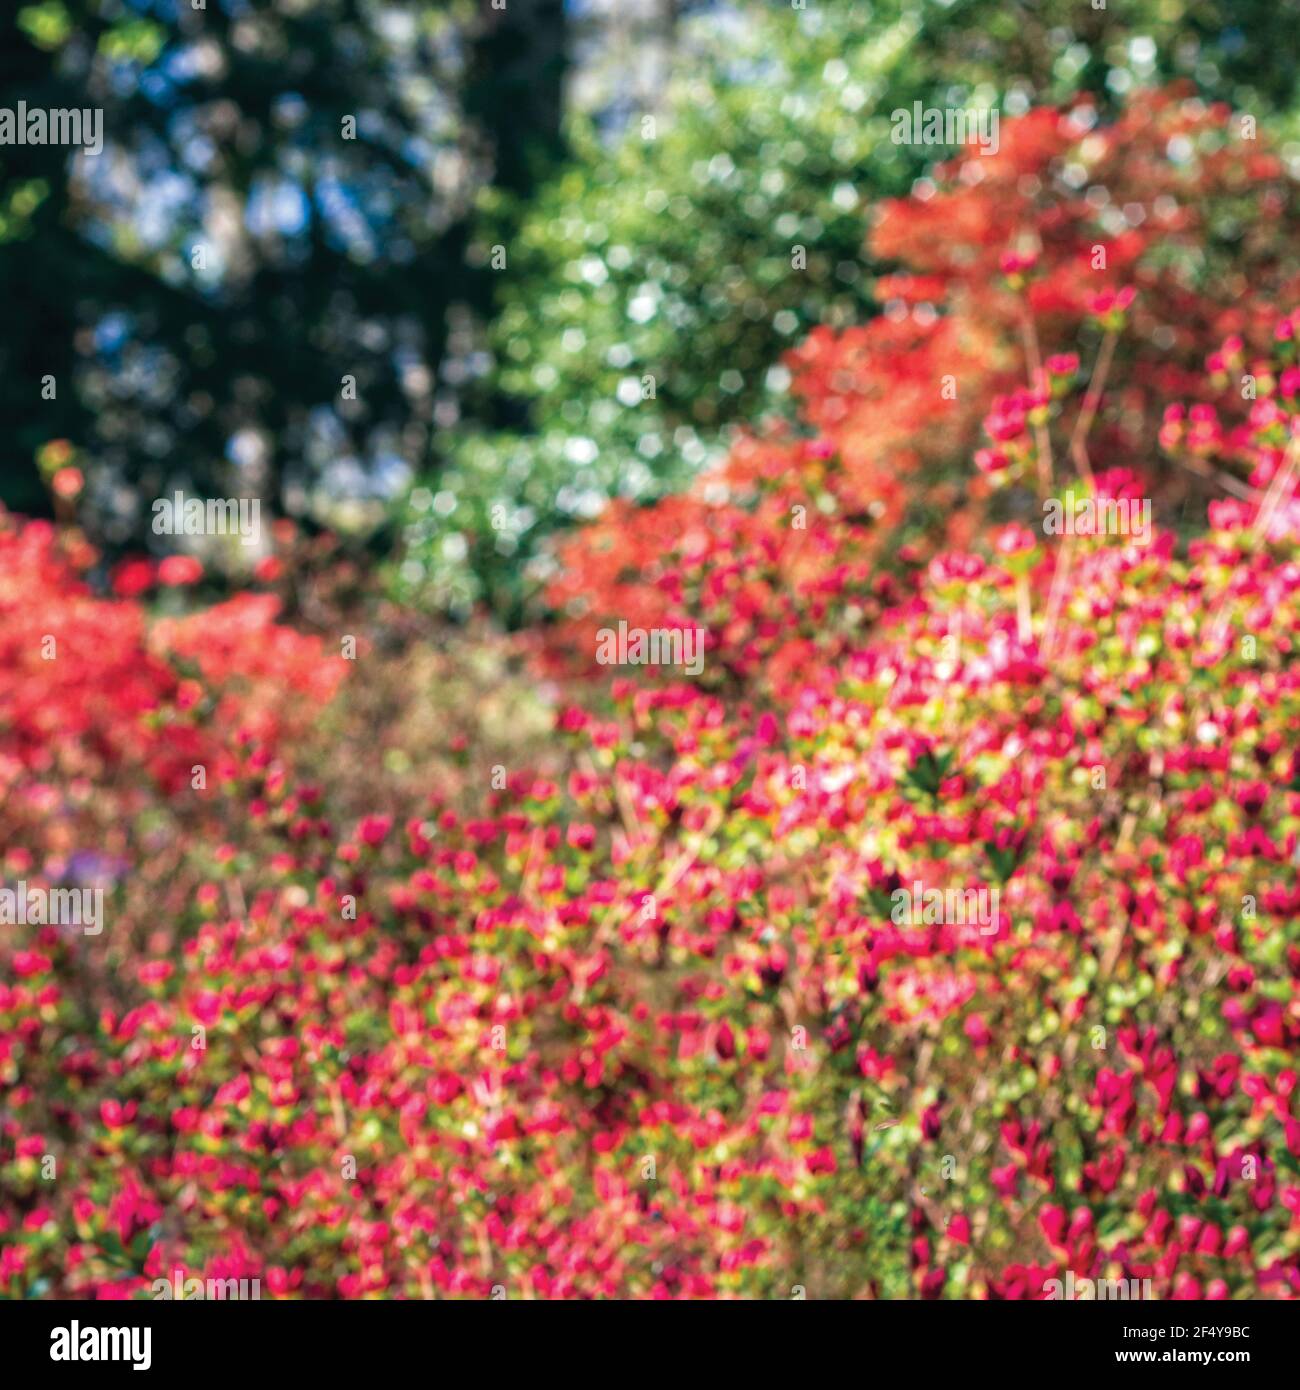 Azalea bushes (Rhododendron) become impressionistic and abstract when deliberately shot out of focus. Stock Photo